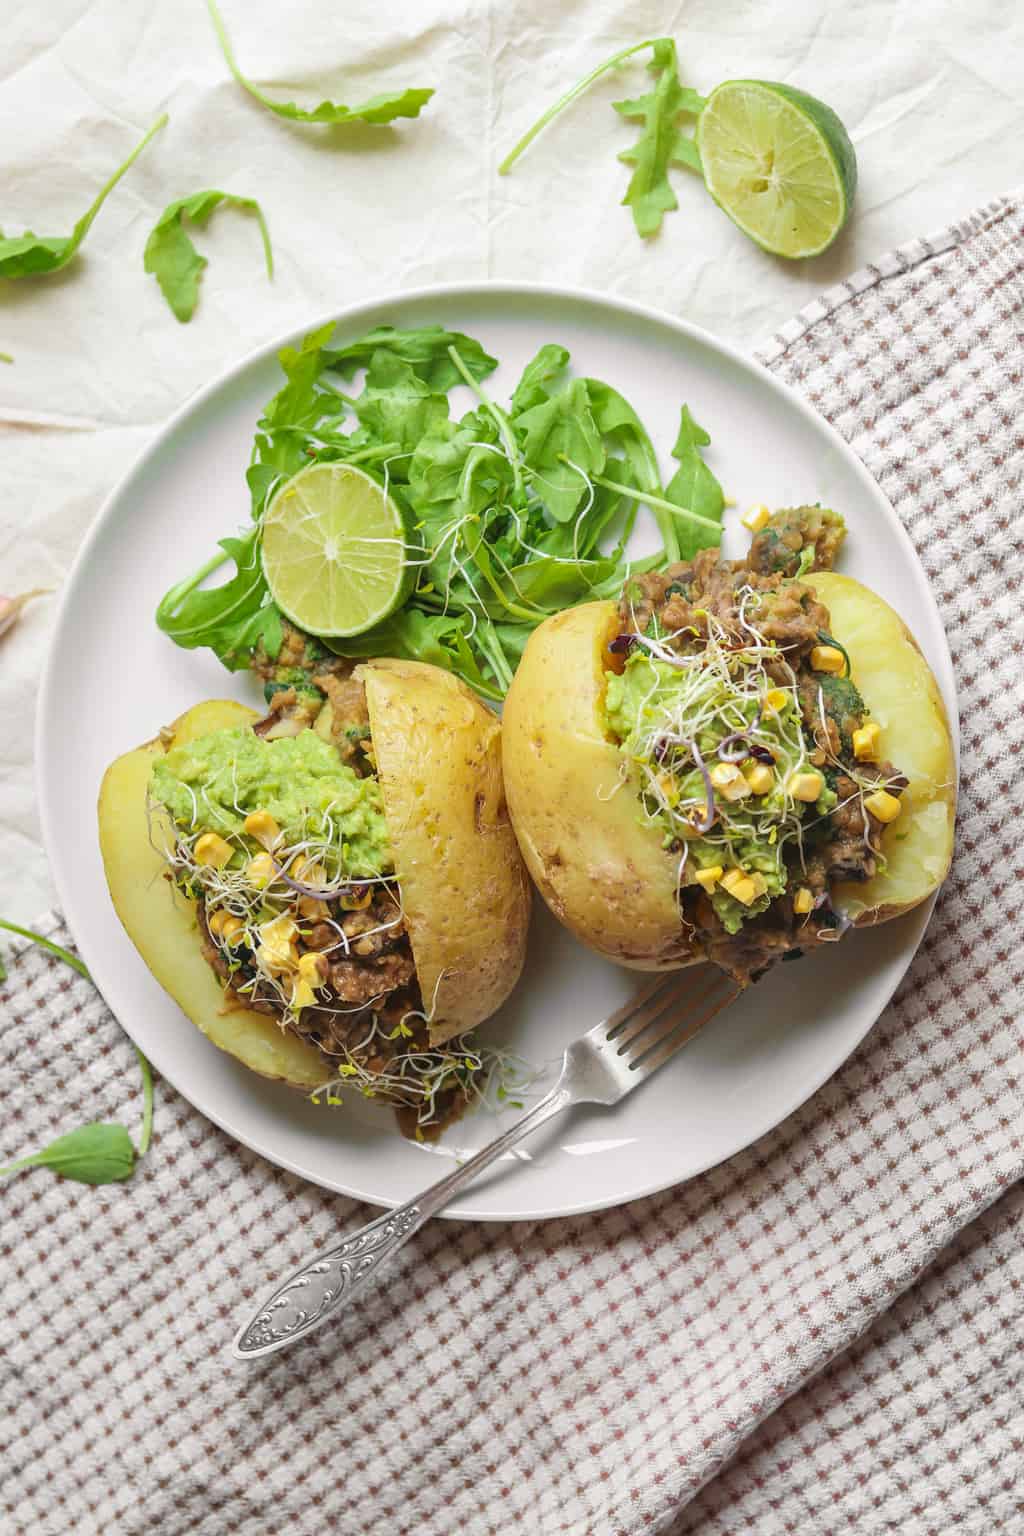 Simple Baked Potatoes With A One-Pot Lentil Filling